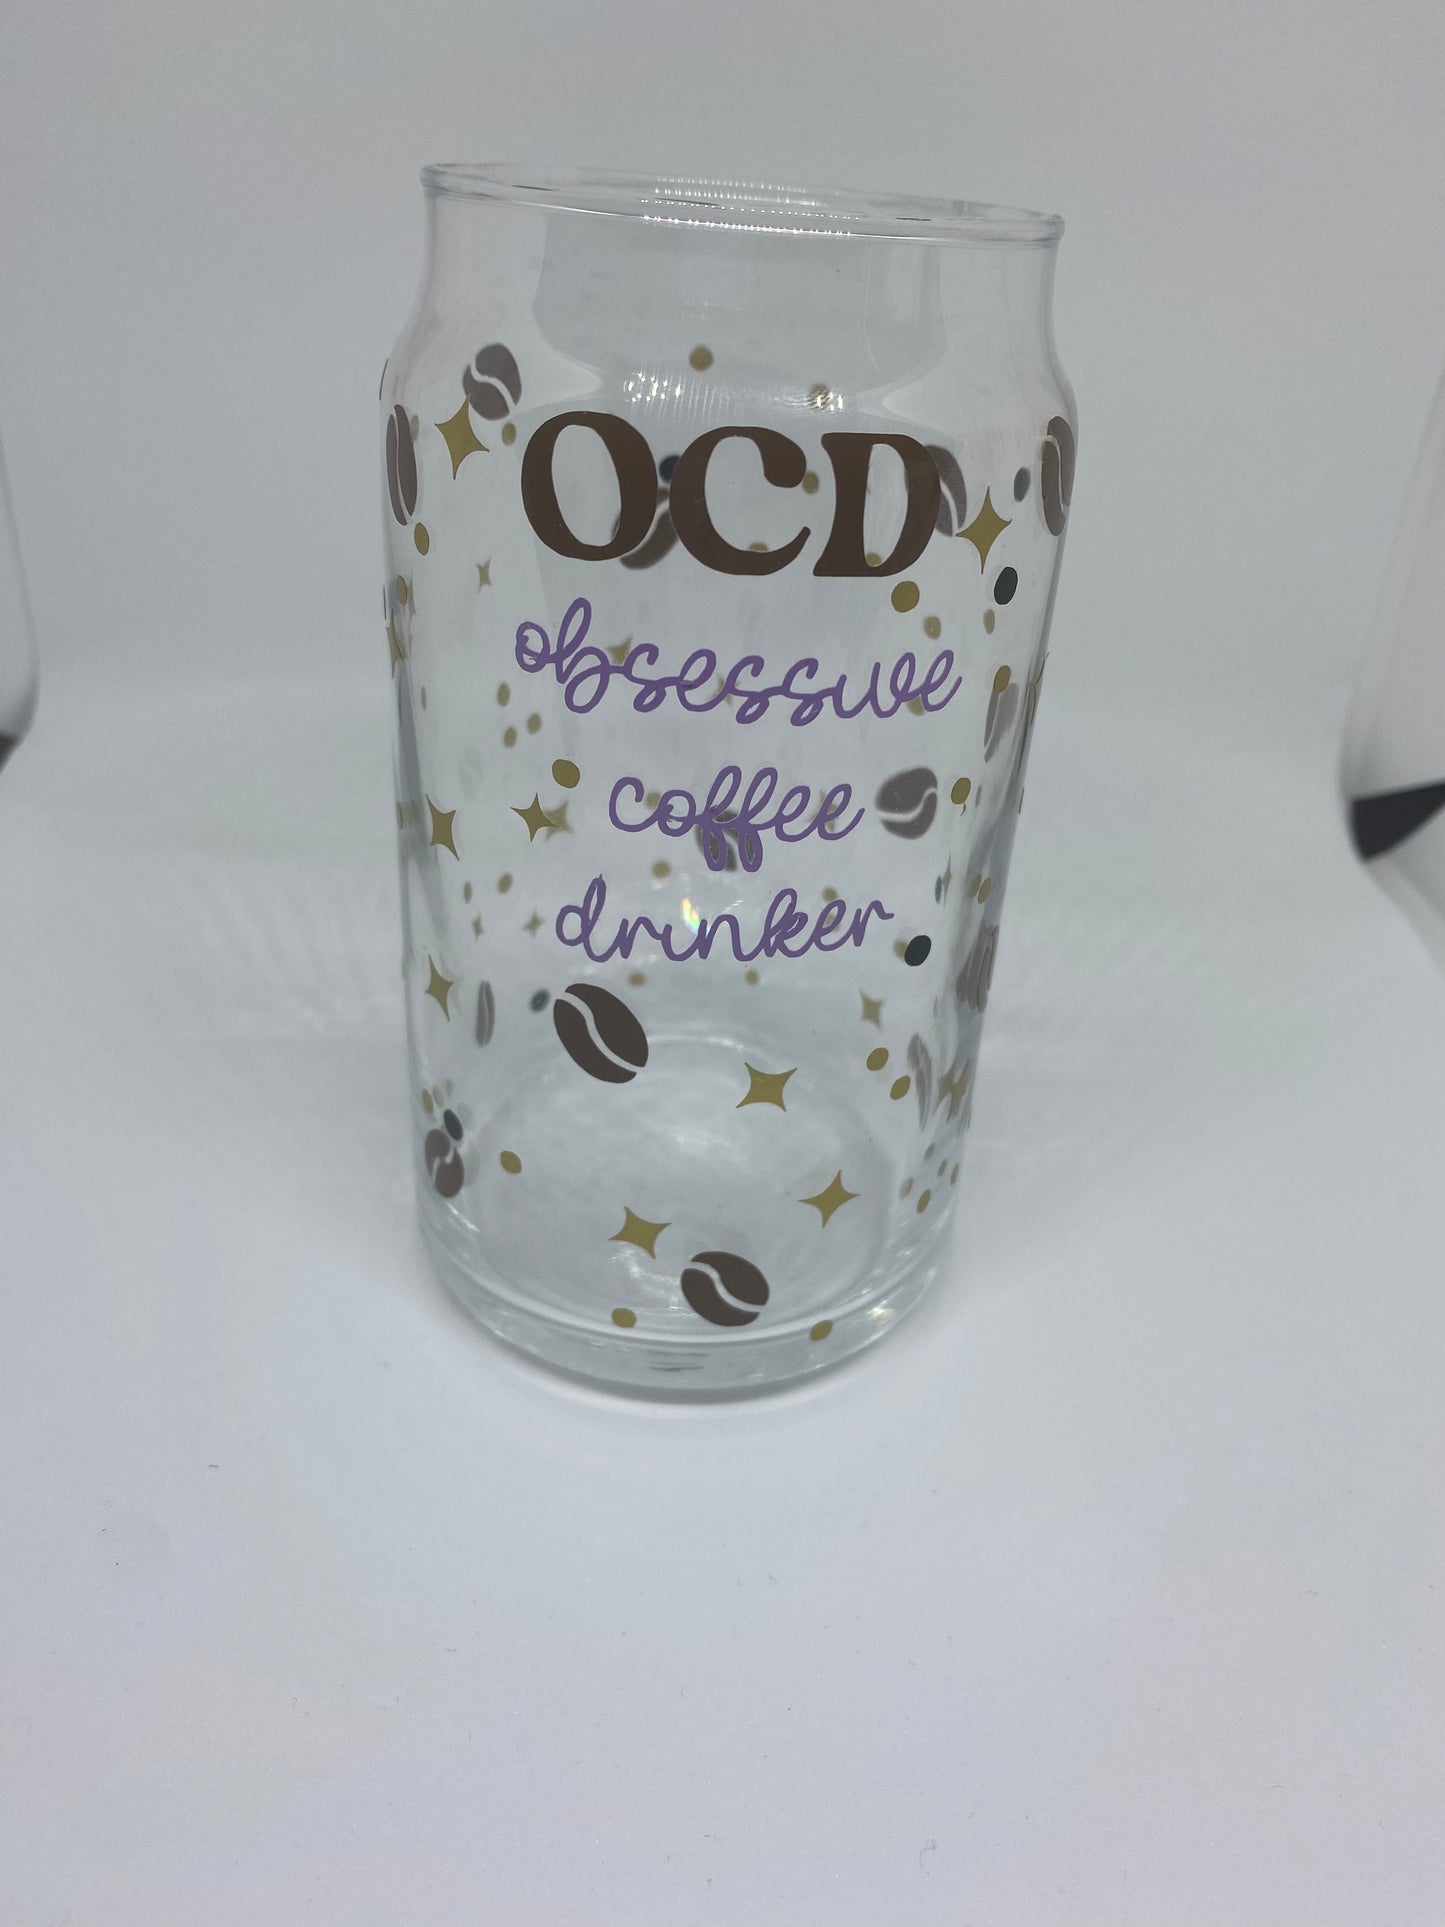 OCD Obsessive Coffee Disorder 16oz Libby Glass, Beer